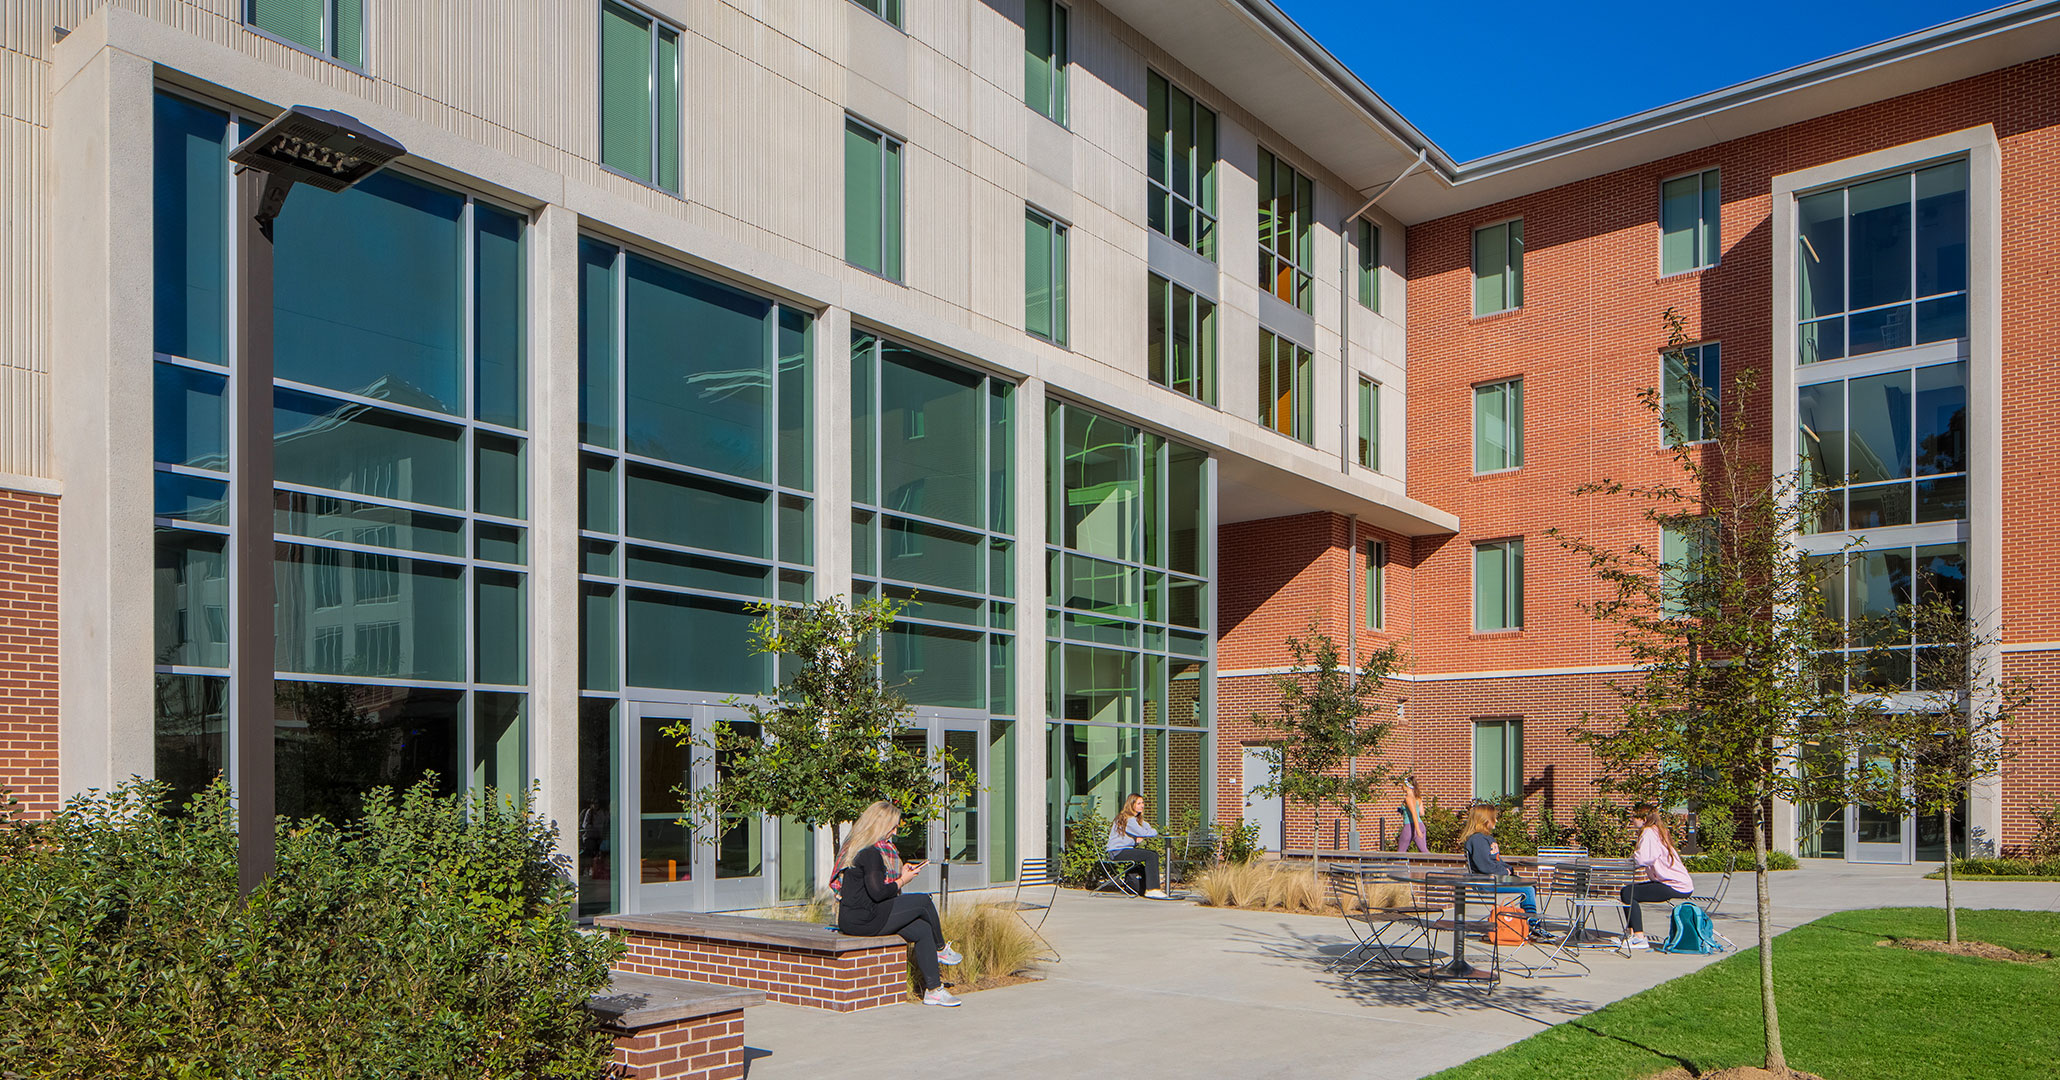 Clemson University hired Boudreaux architects to design student flex areas at Douthit Hills Student Hub.